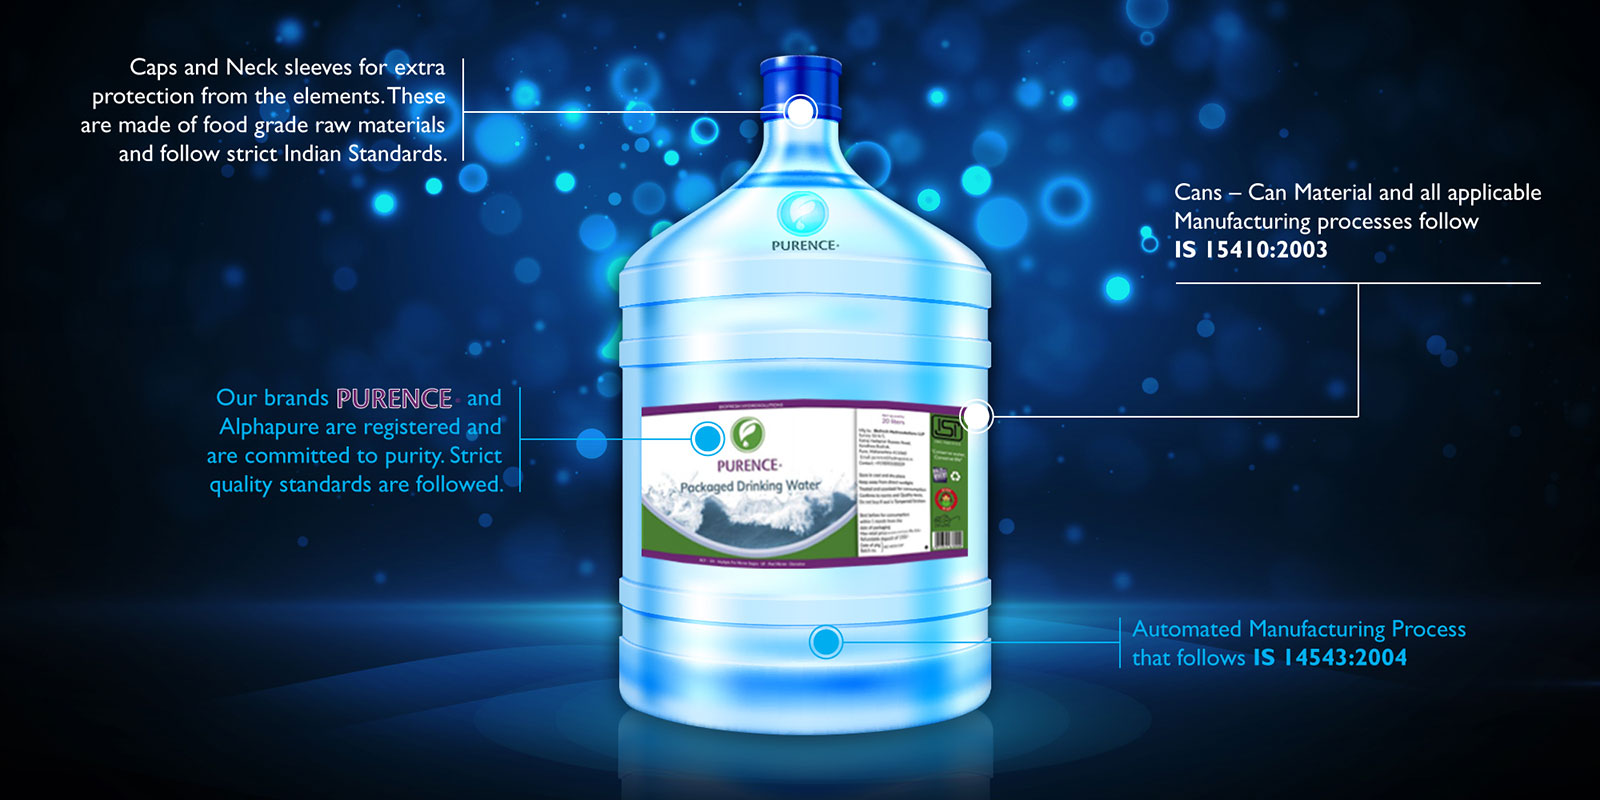 SAFE - CLEAN - DRINKING WATER | PURENCE | DRINKING WATER IN UNDRI, PACKED DRINKING WATER IN UNDRI, WATER JAR SUPPLIERS IN UNDRI, WATER CAN SUPPLIERS IN PISOLI, 20LTR WATER IN UNDRI, SAFE DRINKING WATER IN UNDRI, BEST, TOP, DEALERS, SUPPLIERS. - GL27766